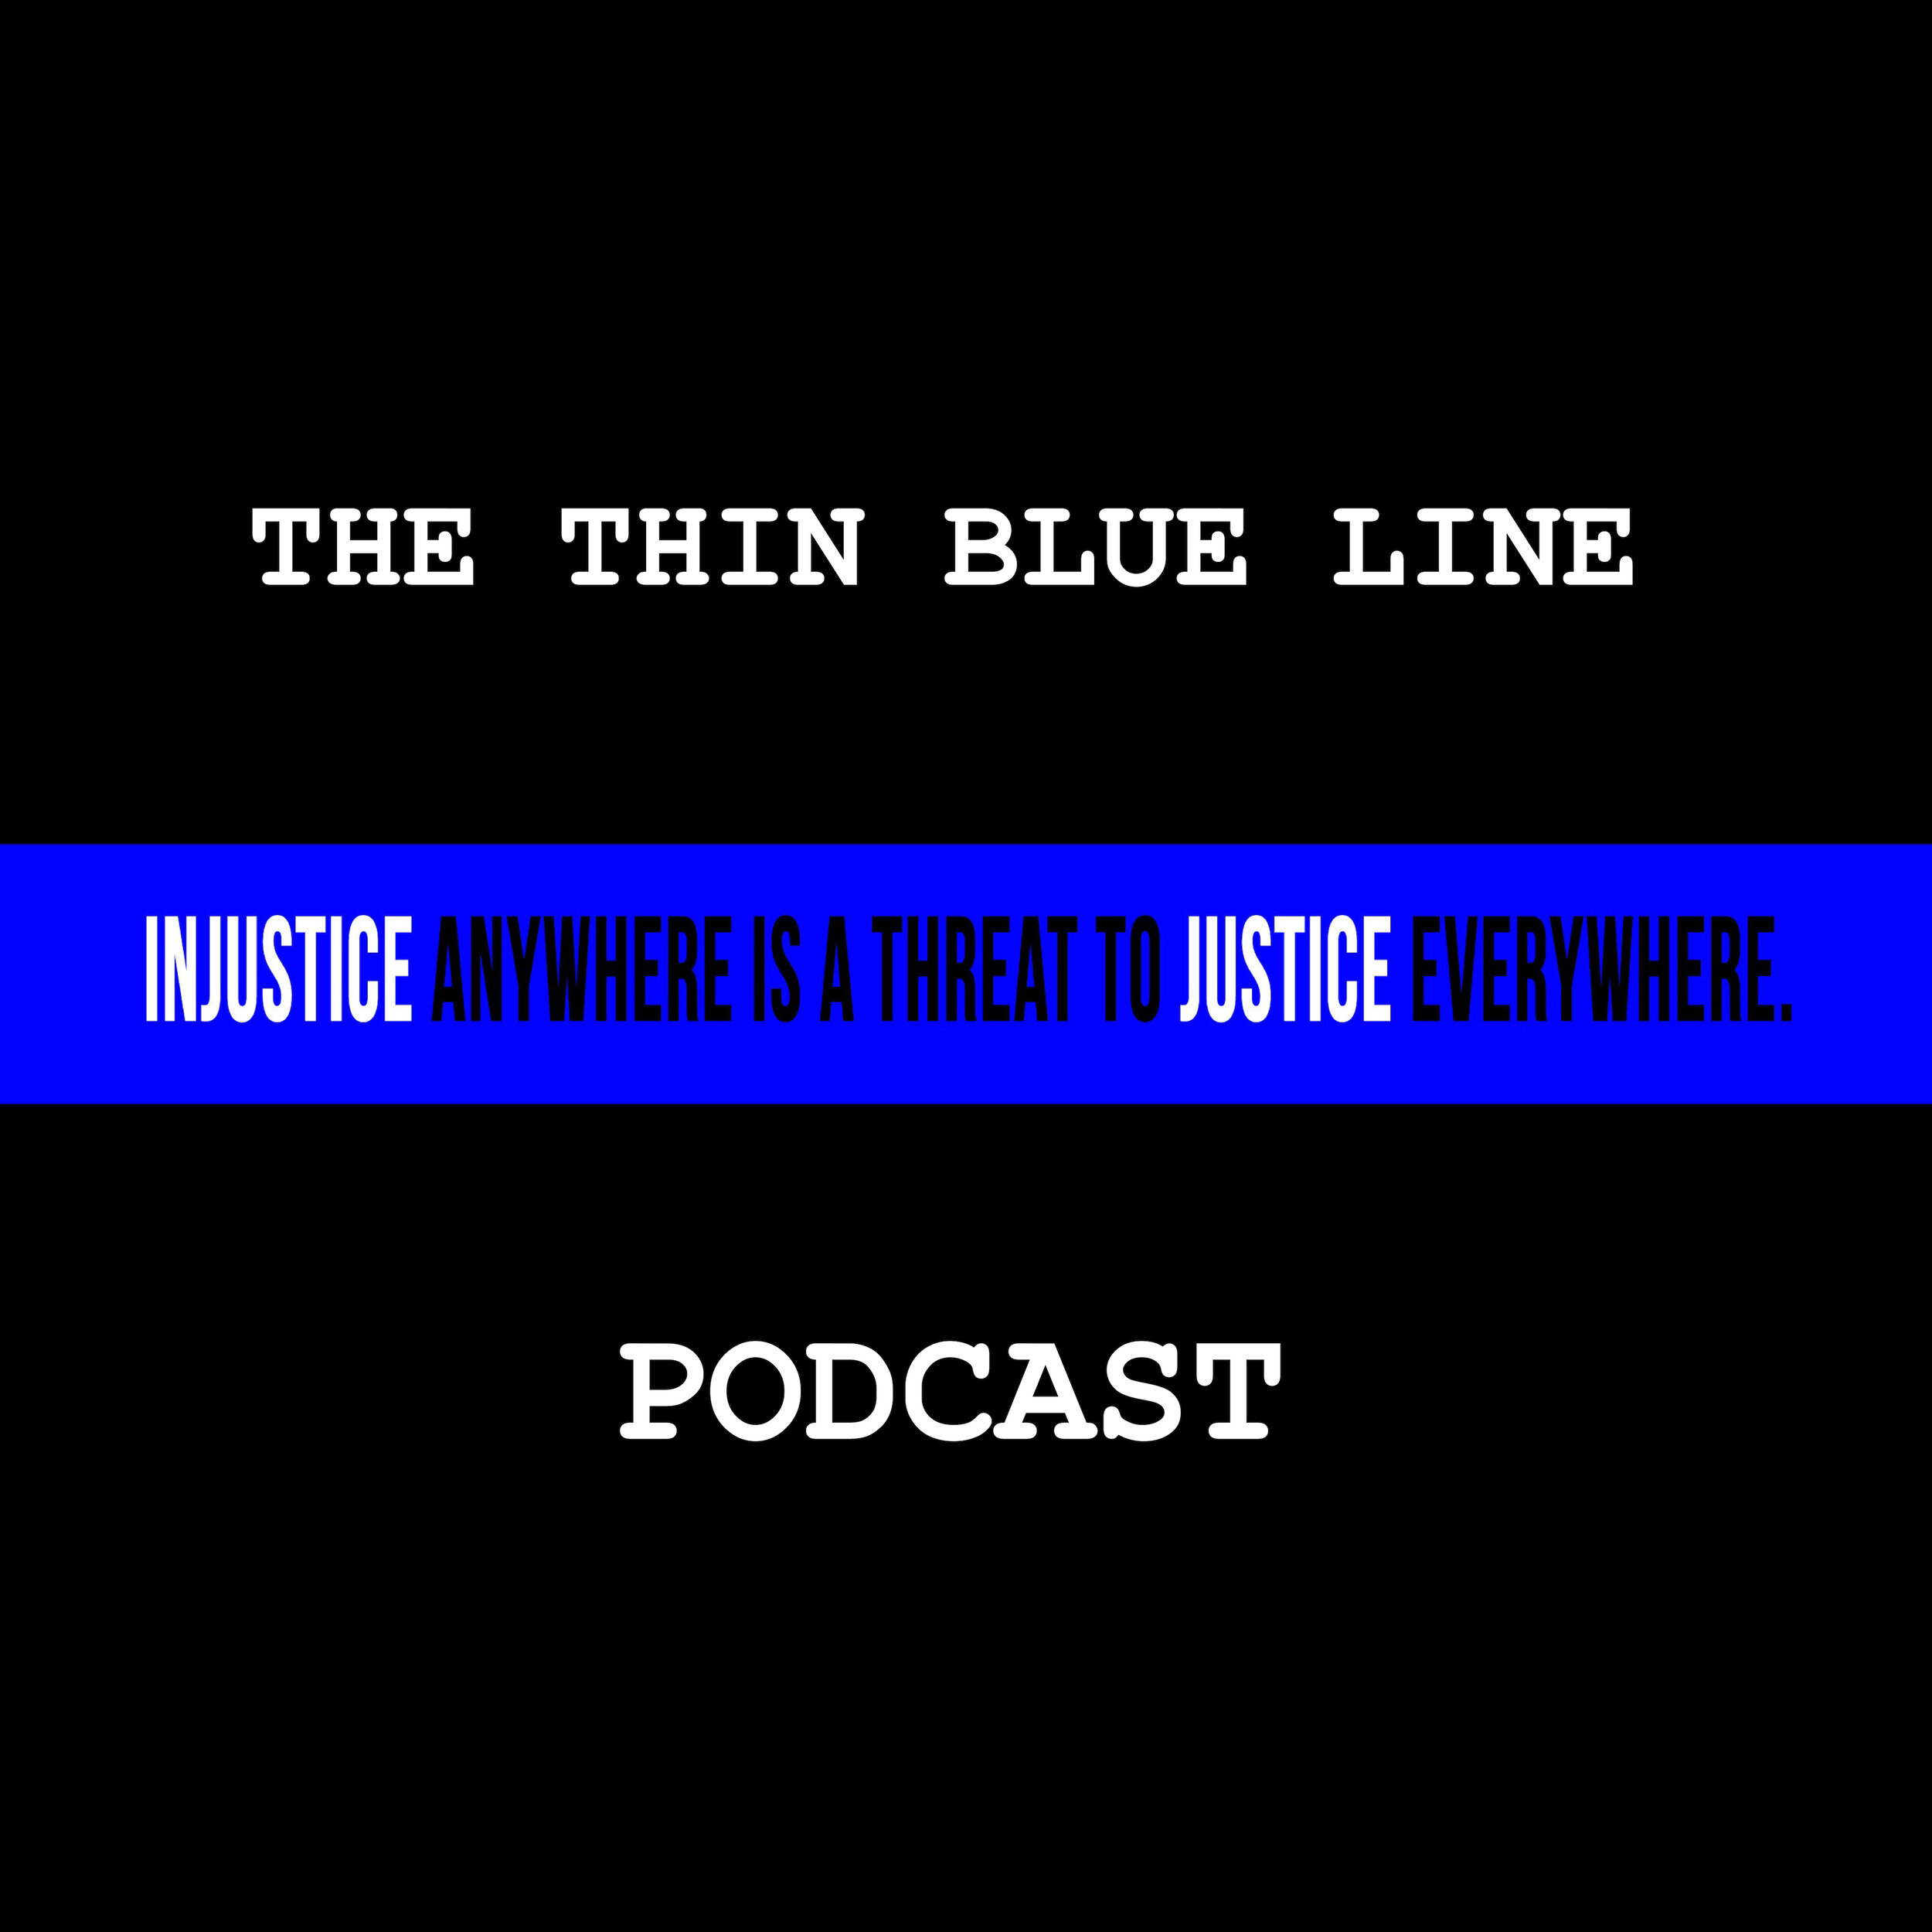 The Thin Blue Line Podcast